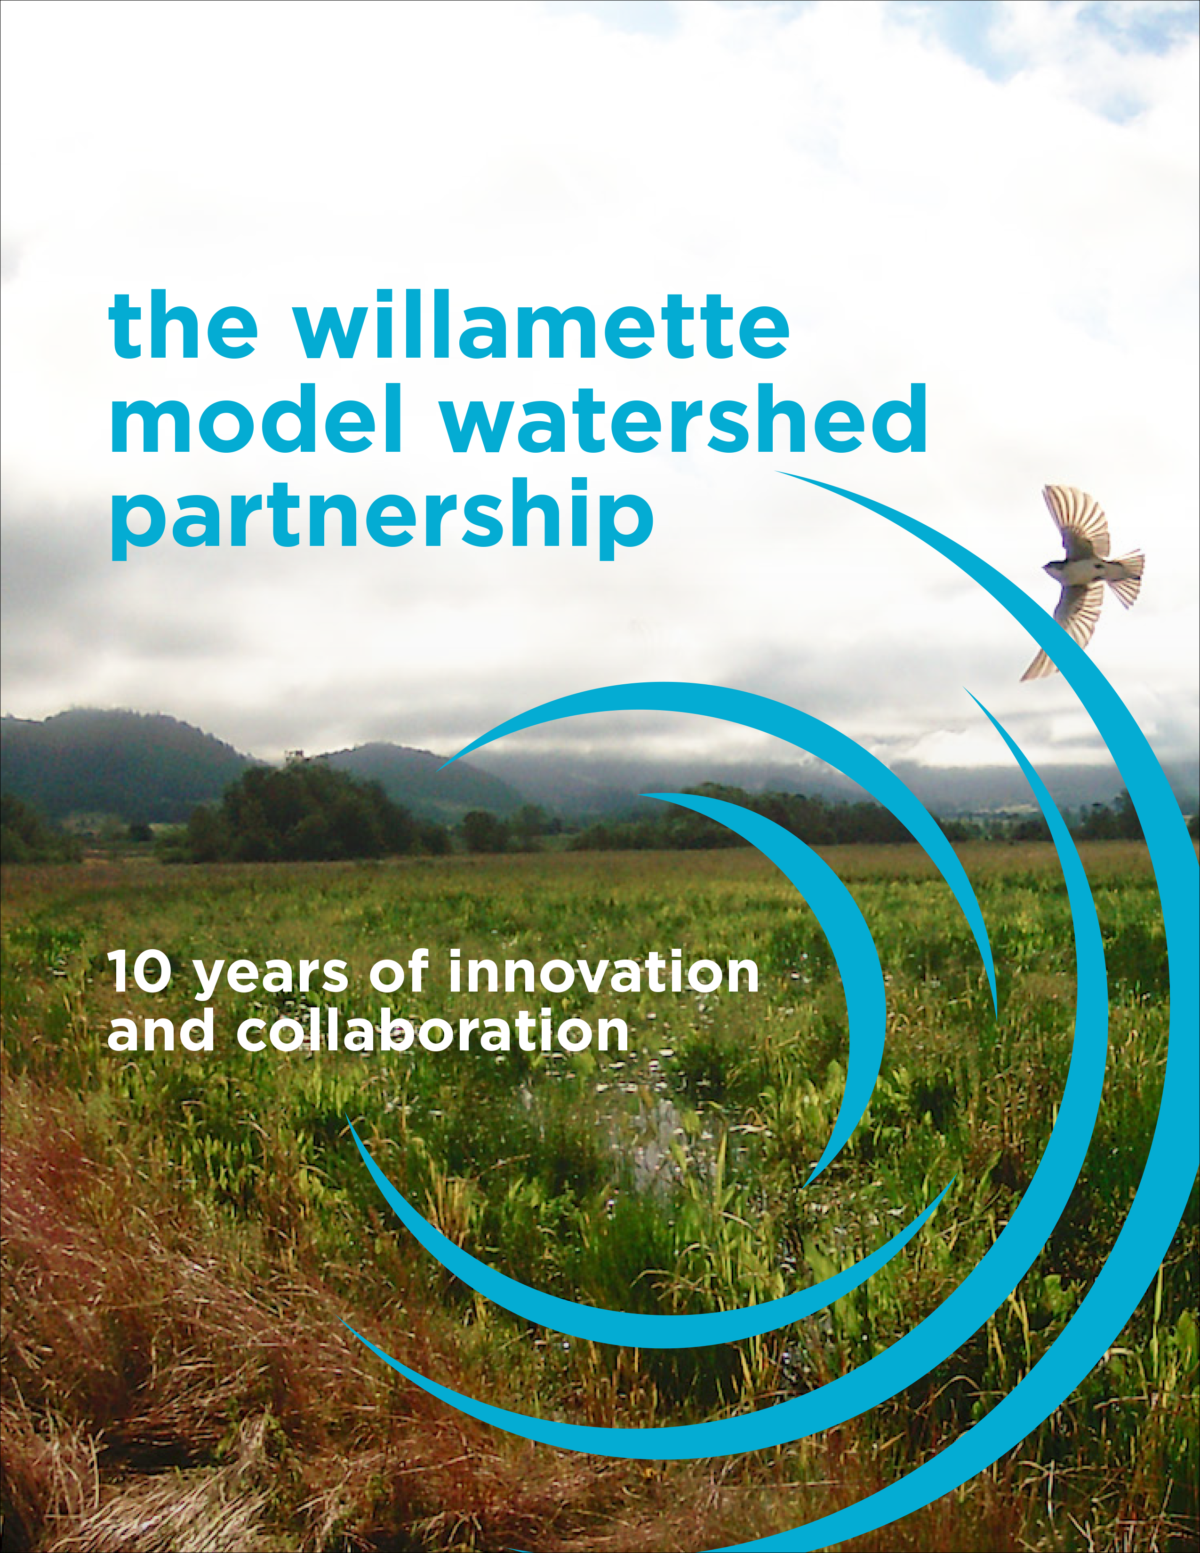 the willamette model watershed partnership. 10 year of innovation and collaboration